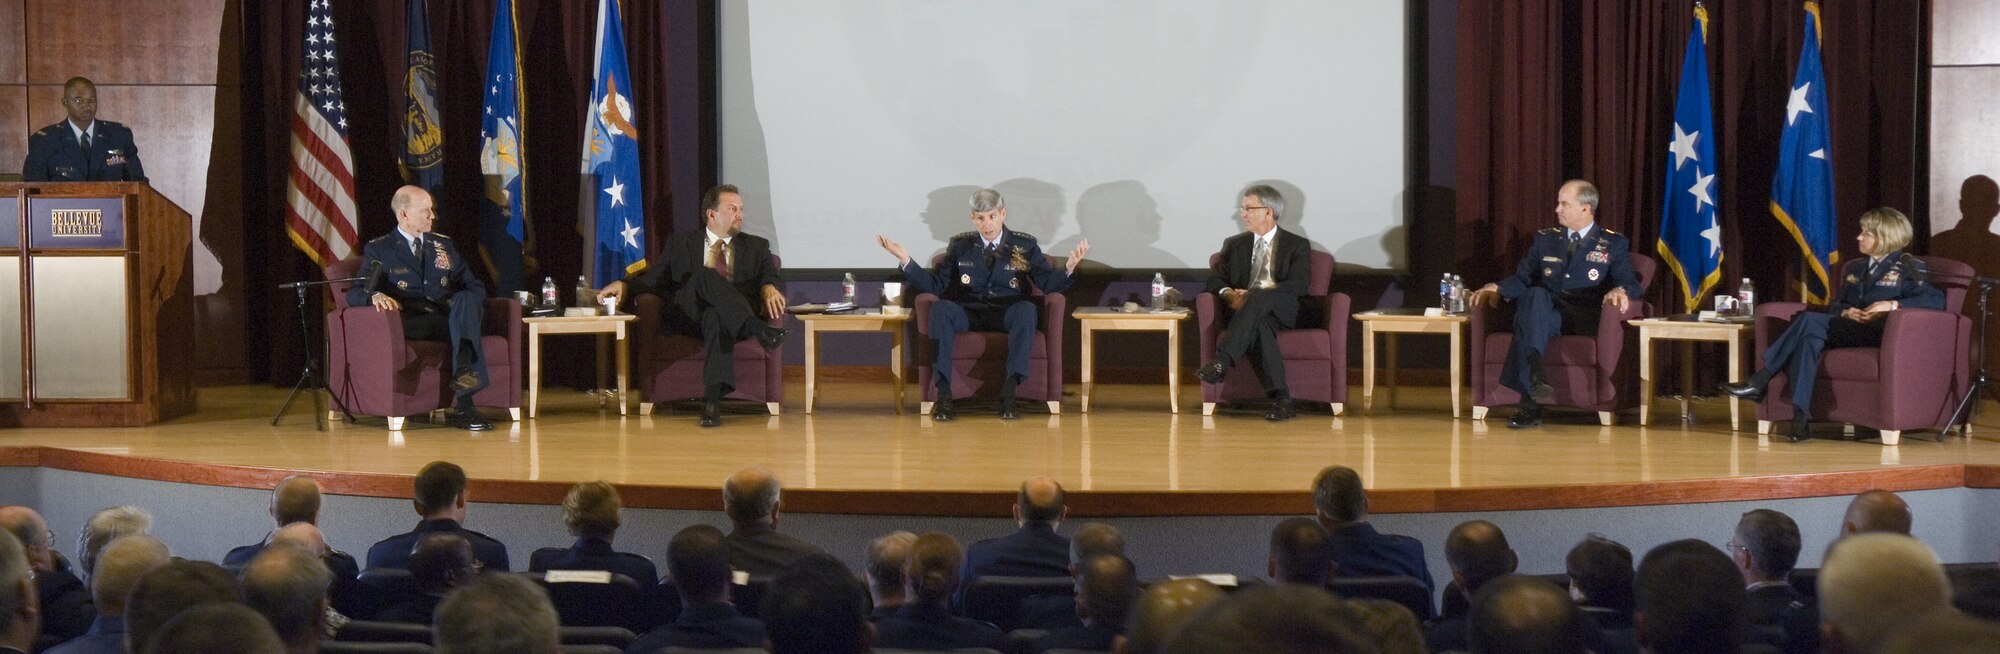 Lt. Col. Joe Sanders (from left to right), Gen. John D.W. Corley, Derrick J. Leathers, Gen. Norton A. Schwartz,  Wayne Sensor, Gen. Kevin P. Chilton and Lt. Gen. Terry L. Gabreski answer questions during the Executive Leadership Forum Aug. 15 at Bellevue University in Nebraska during Air Force Week in the Heartland. Colonel Sanders was the forum facilitator, General Corley is the commander of Air Combat Command, General Schwartz is the Air Force chief of staff, General Chilton is the commander of U.S. Strategic Command, and General Gabreski is the vice commander of Air Force Materiel Command. Mr. Leathers and Mr. Sensor are community leaders from the Heartland region. (U.S. Air Force photo/Lance Cheung)